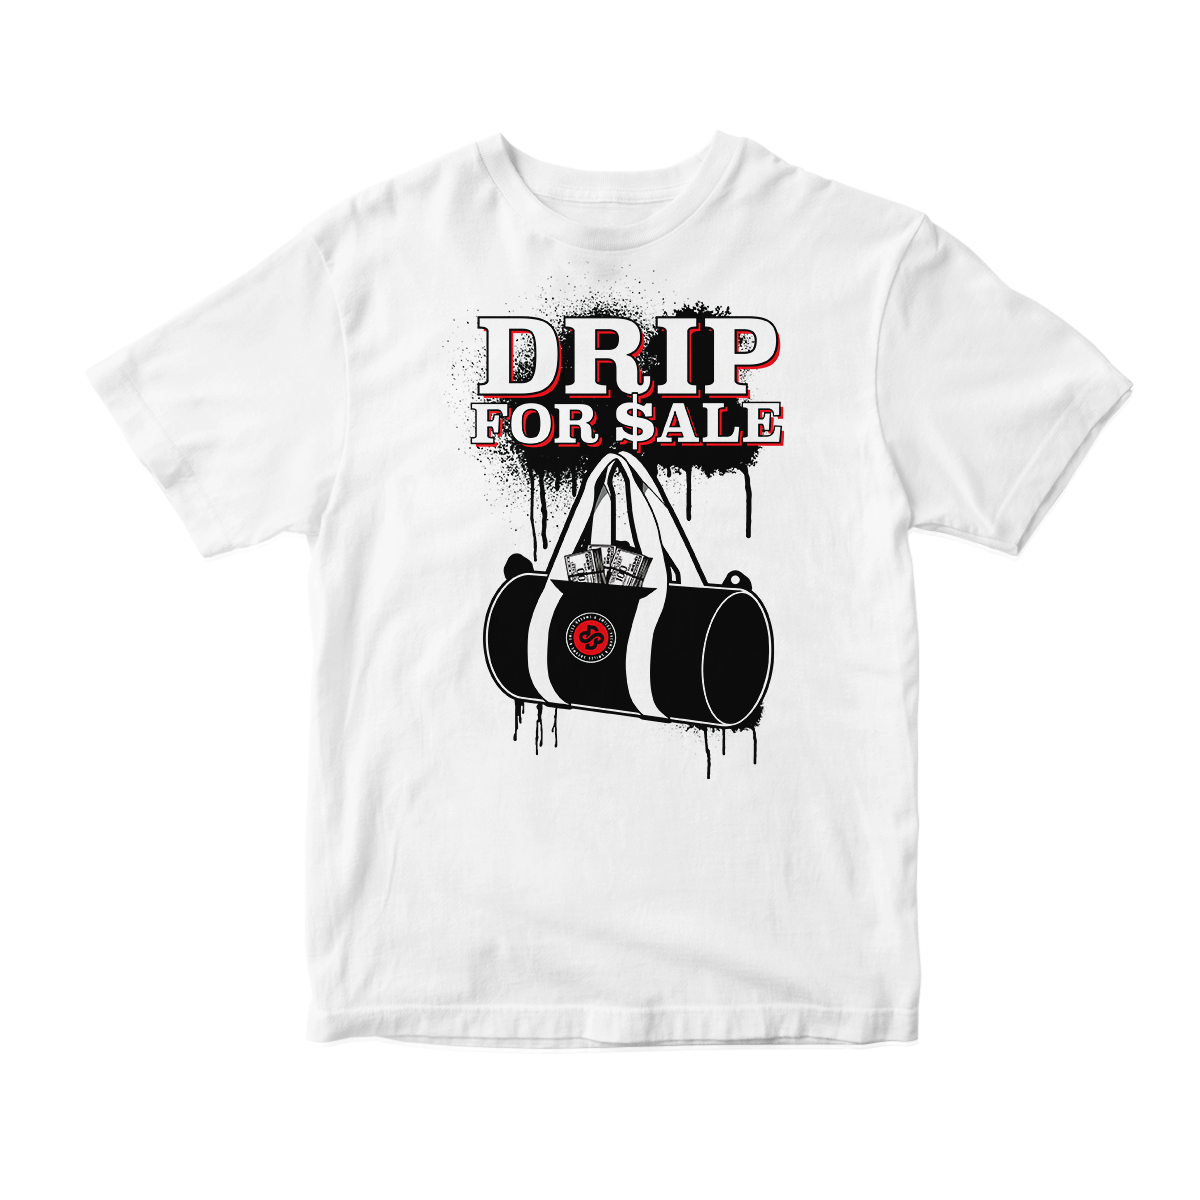 'Drip For Sale' in Reverse He Got Game CW Short Sleeve Tee